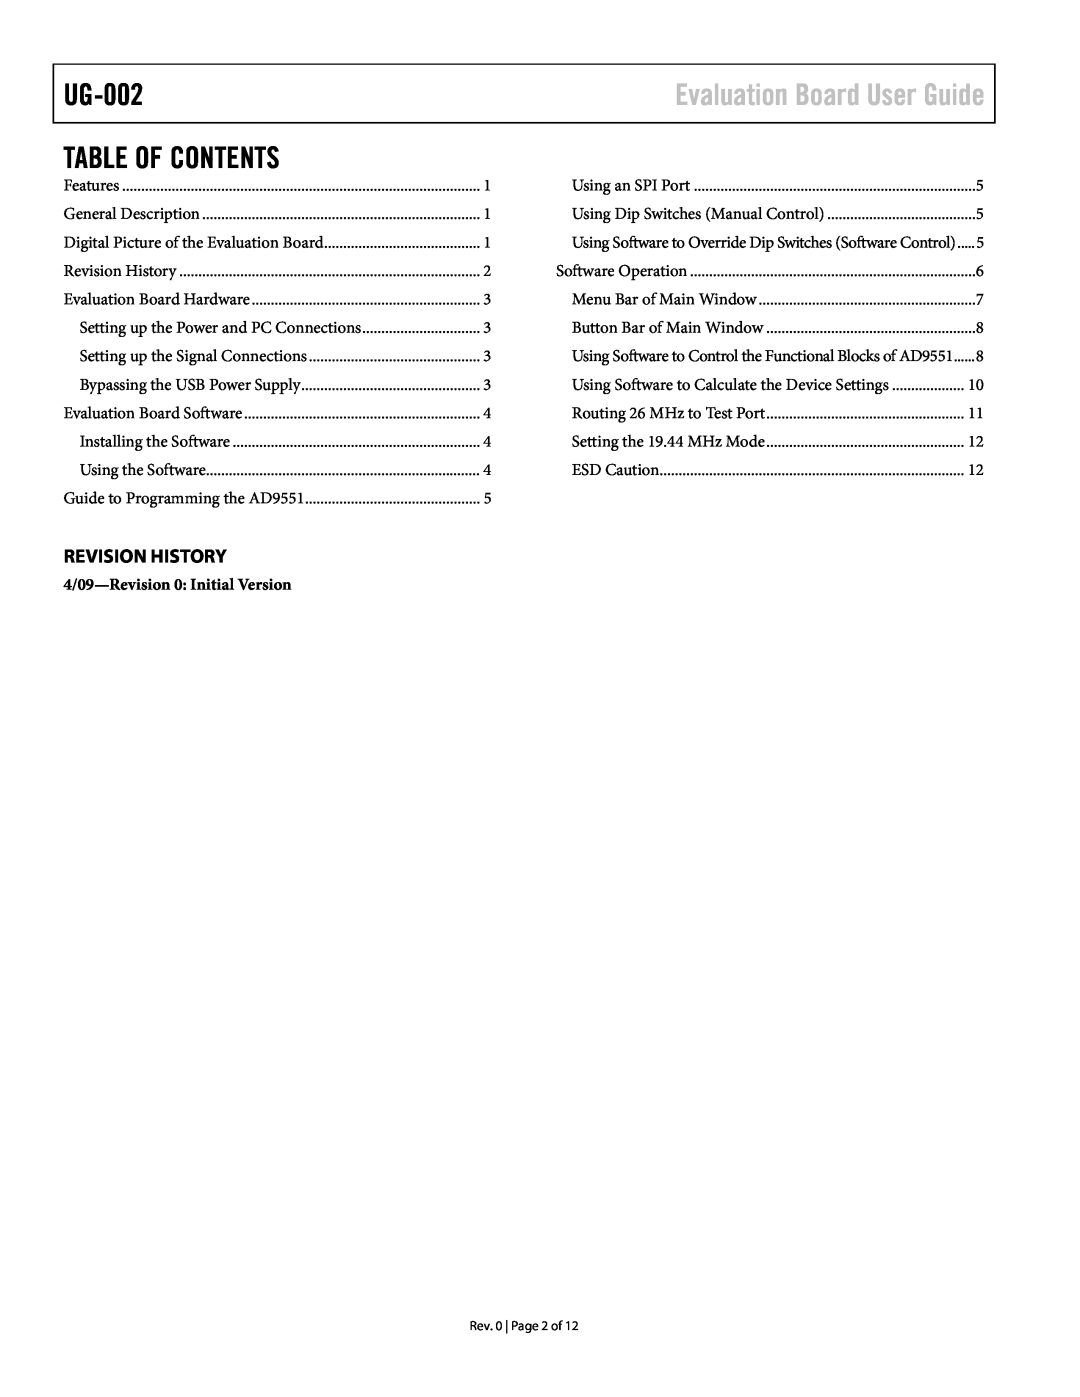 Analog Devices UG-002 Table Of Contents, Evaluation Board User Guide, Revision History, 4/09-Revision 0 Initial Version 